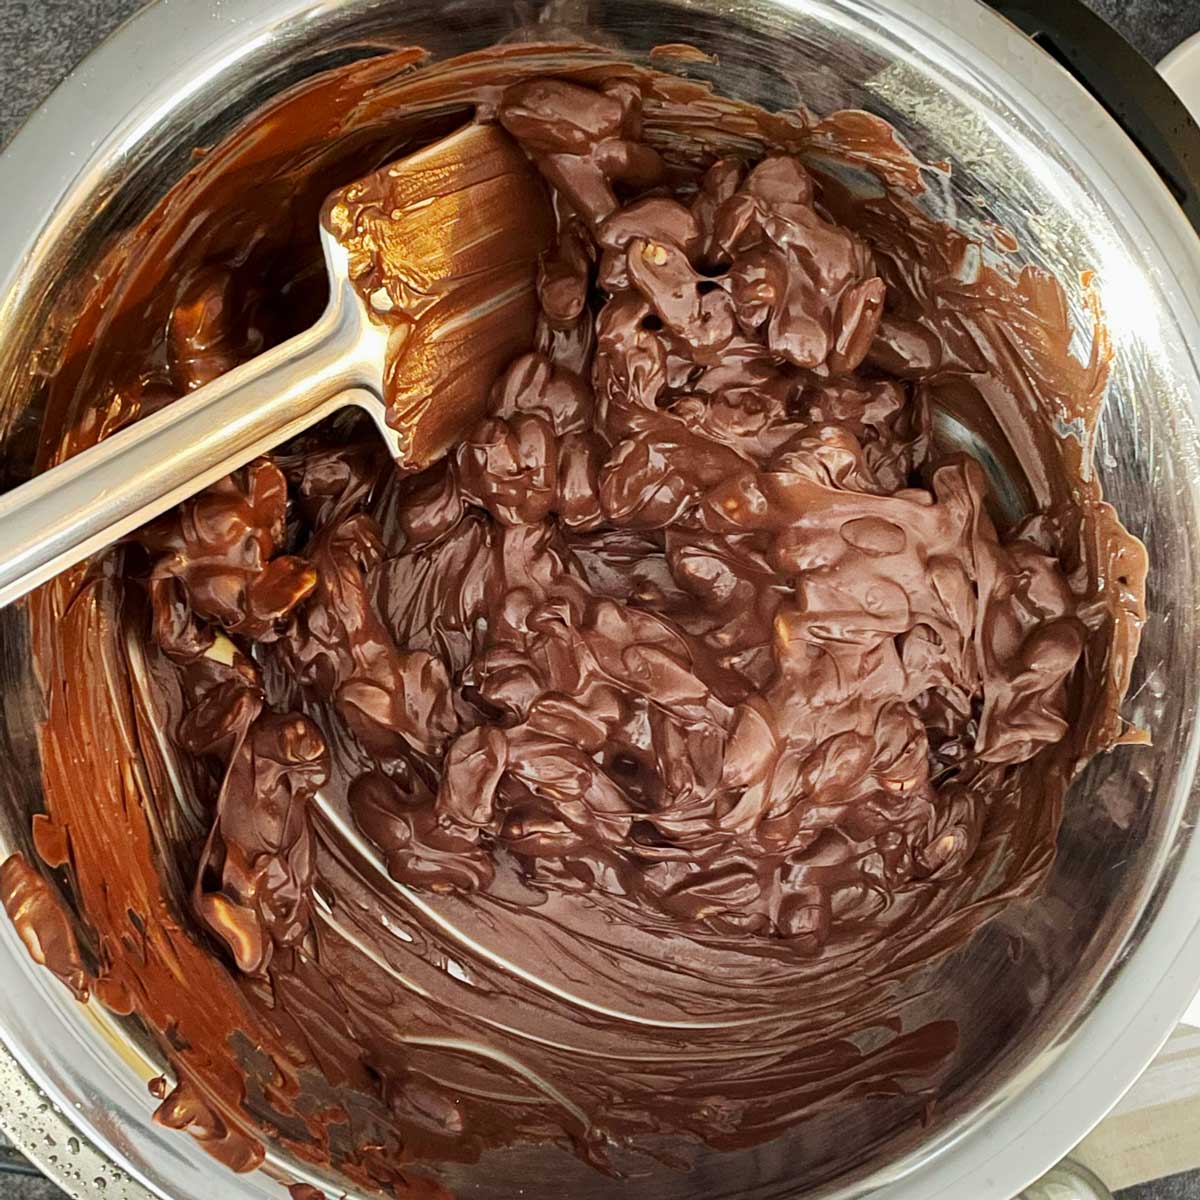 Melted chocolate and peanut mix.